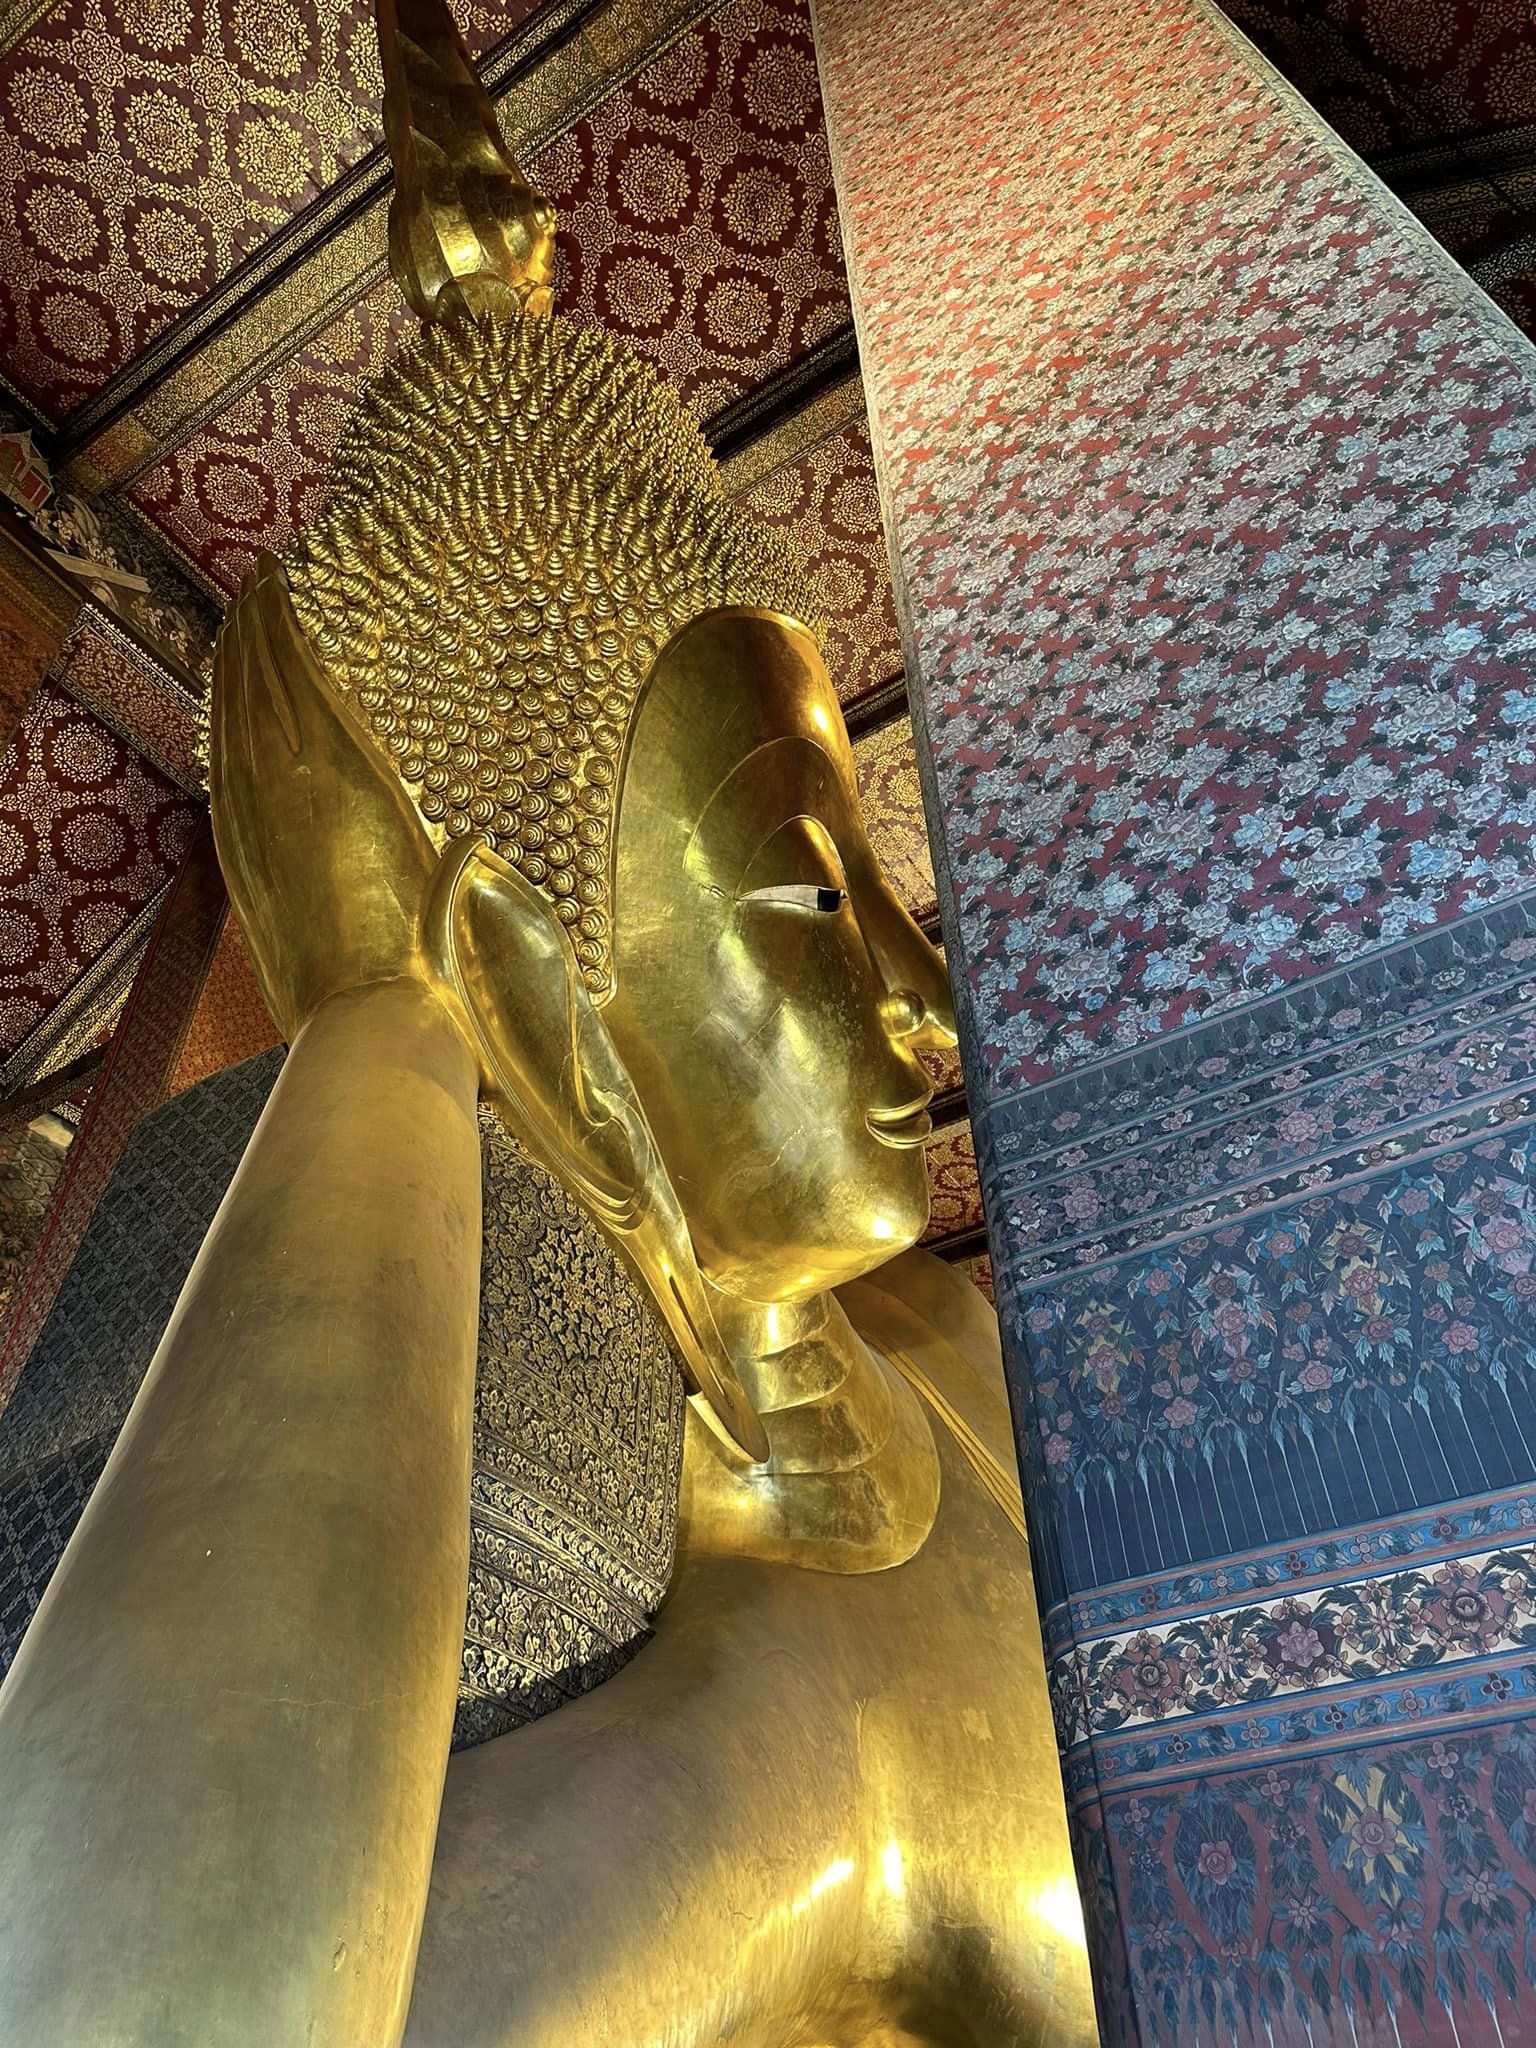 Wat Pho’s gold plated, largest Reclining Buddha measures 15 meters high and 46 meters long